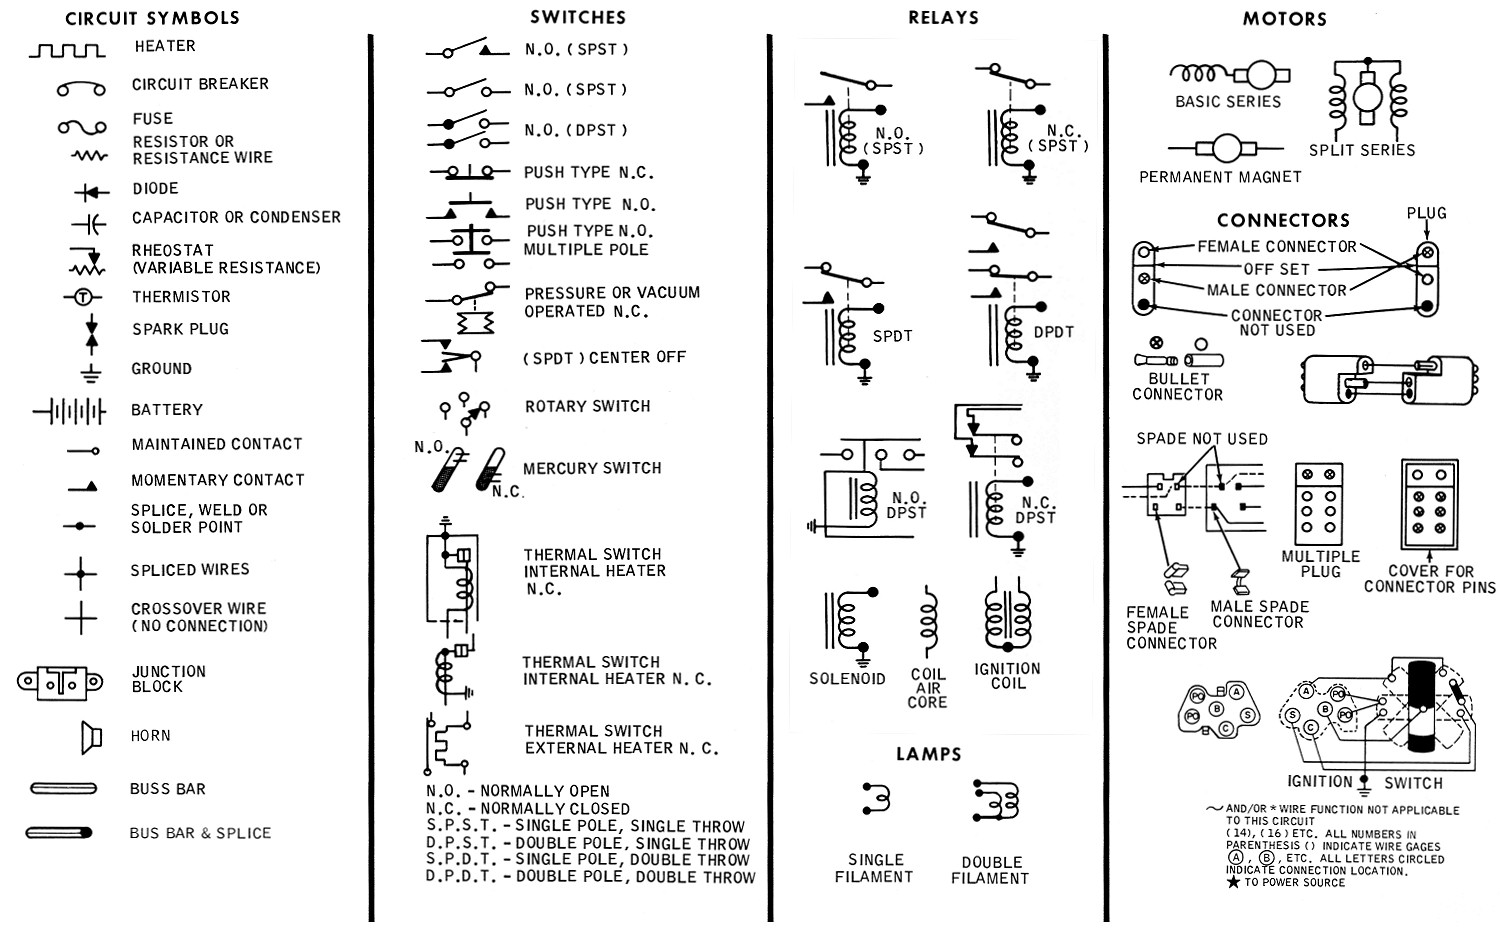 1968 Mustang Wiring Diagrams And Vacuum Schematics